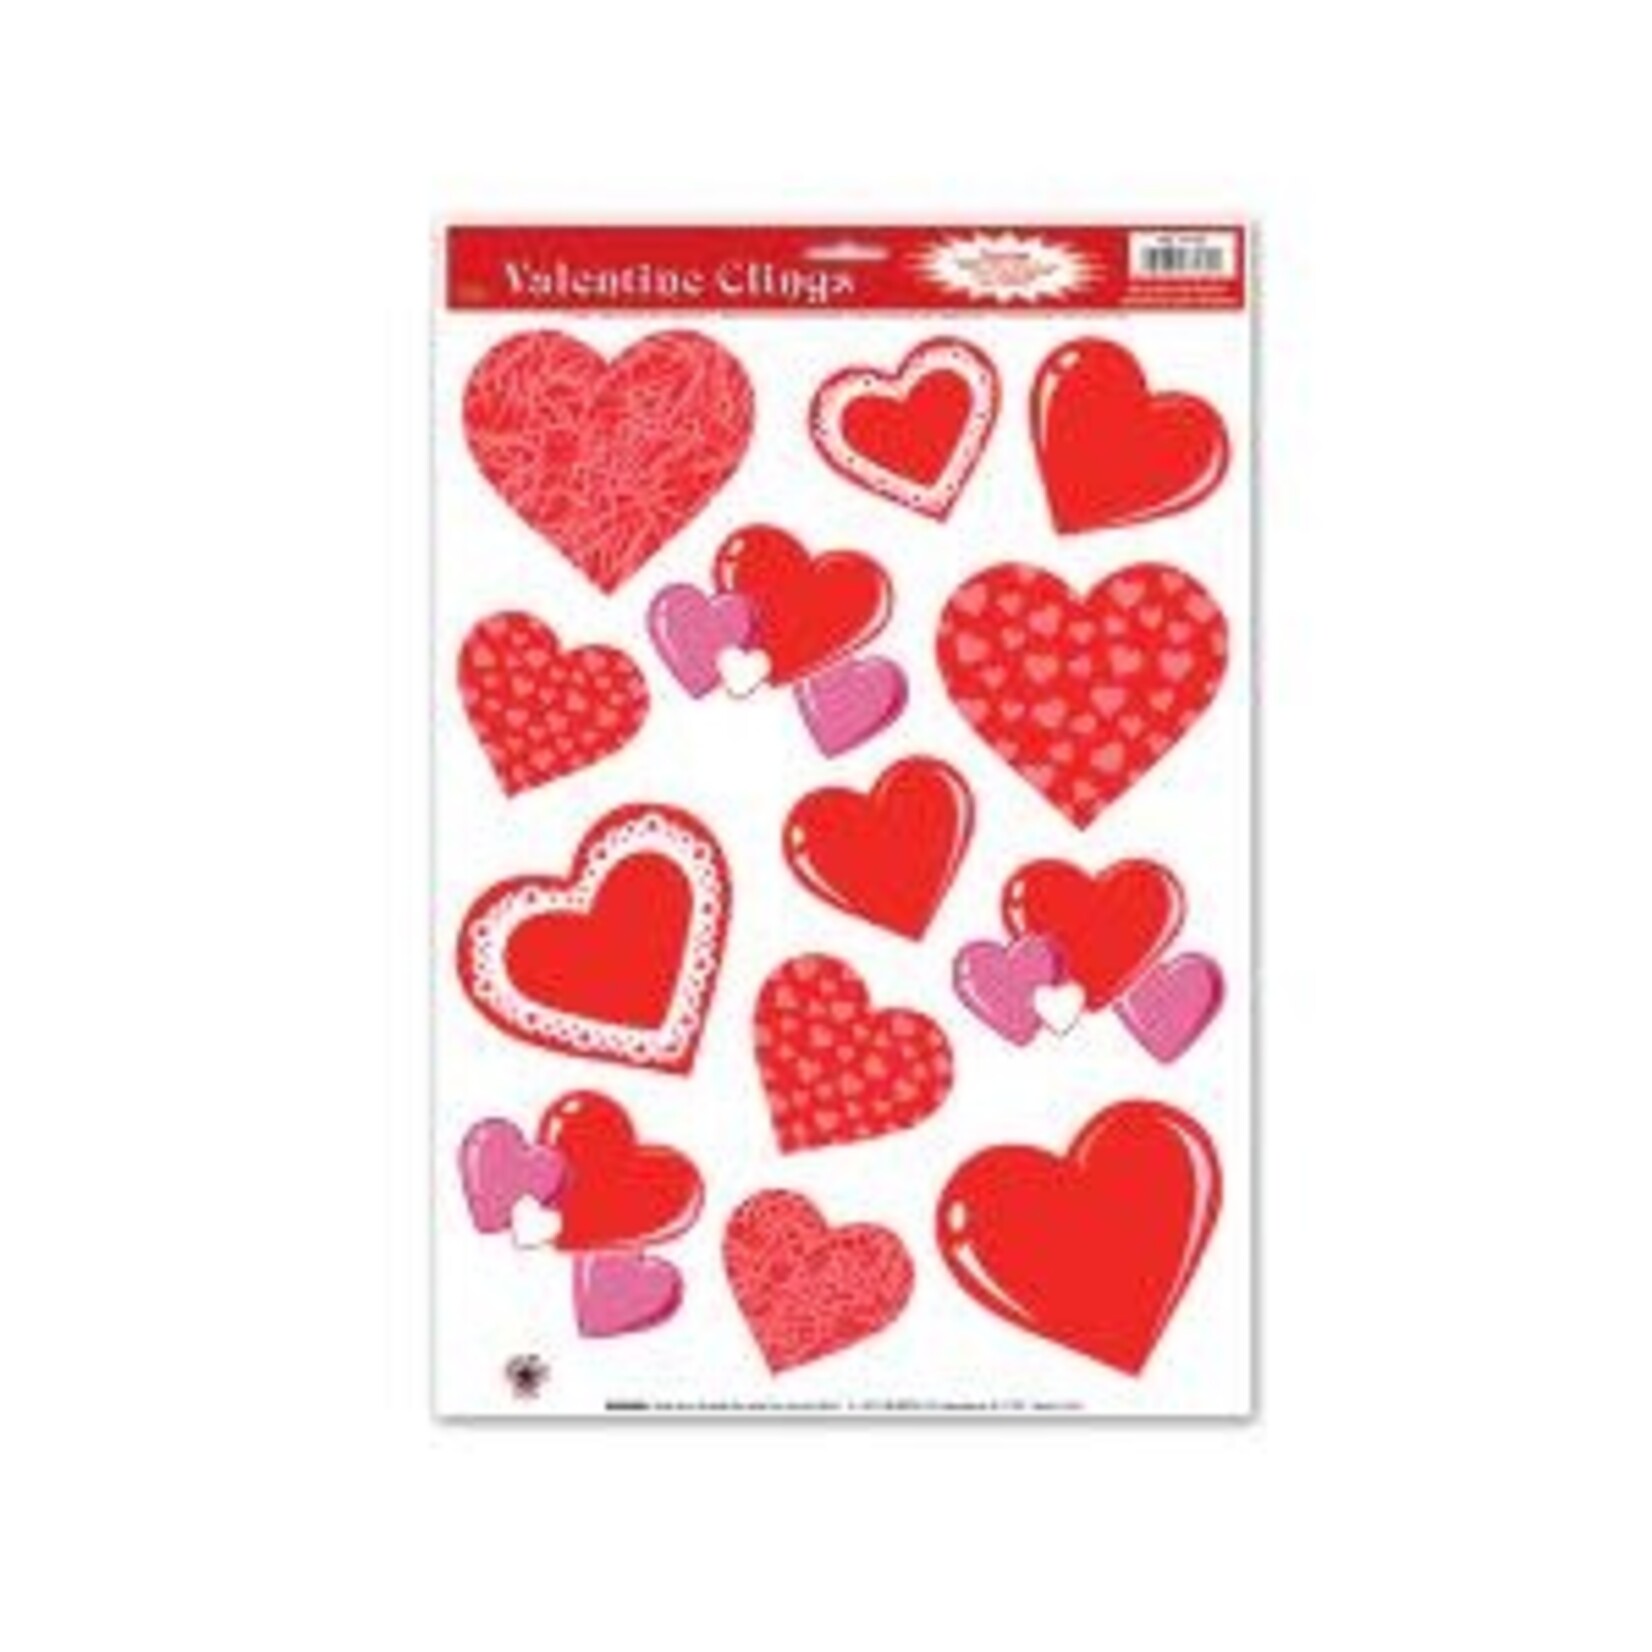 Beistle Valentine's Day Heart Window Clings - 13ct.